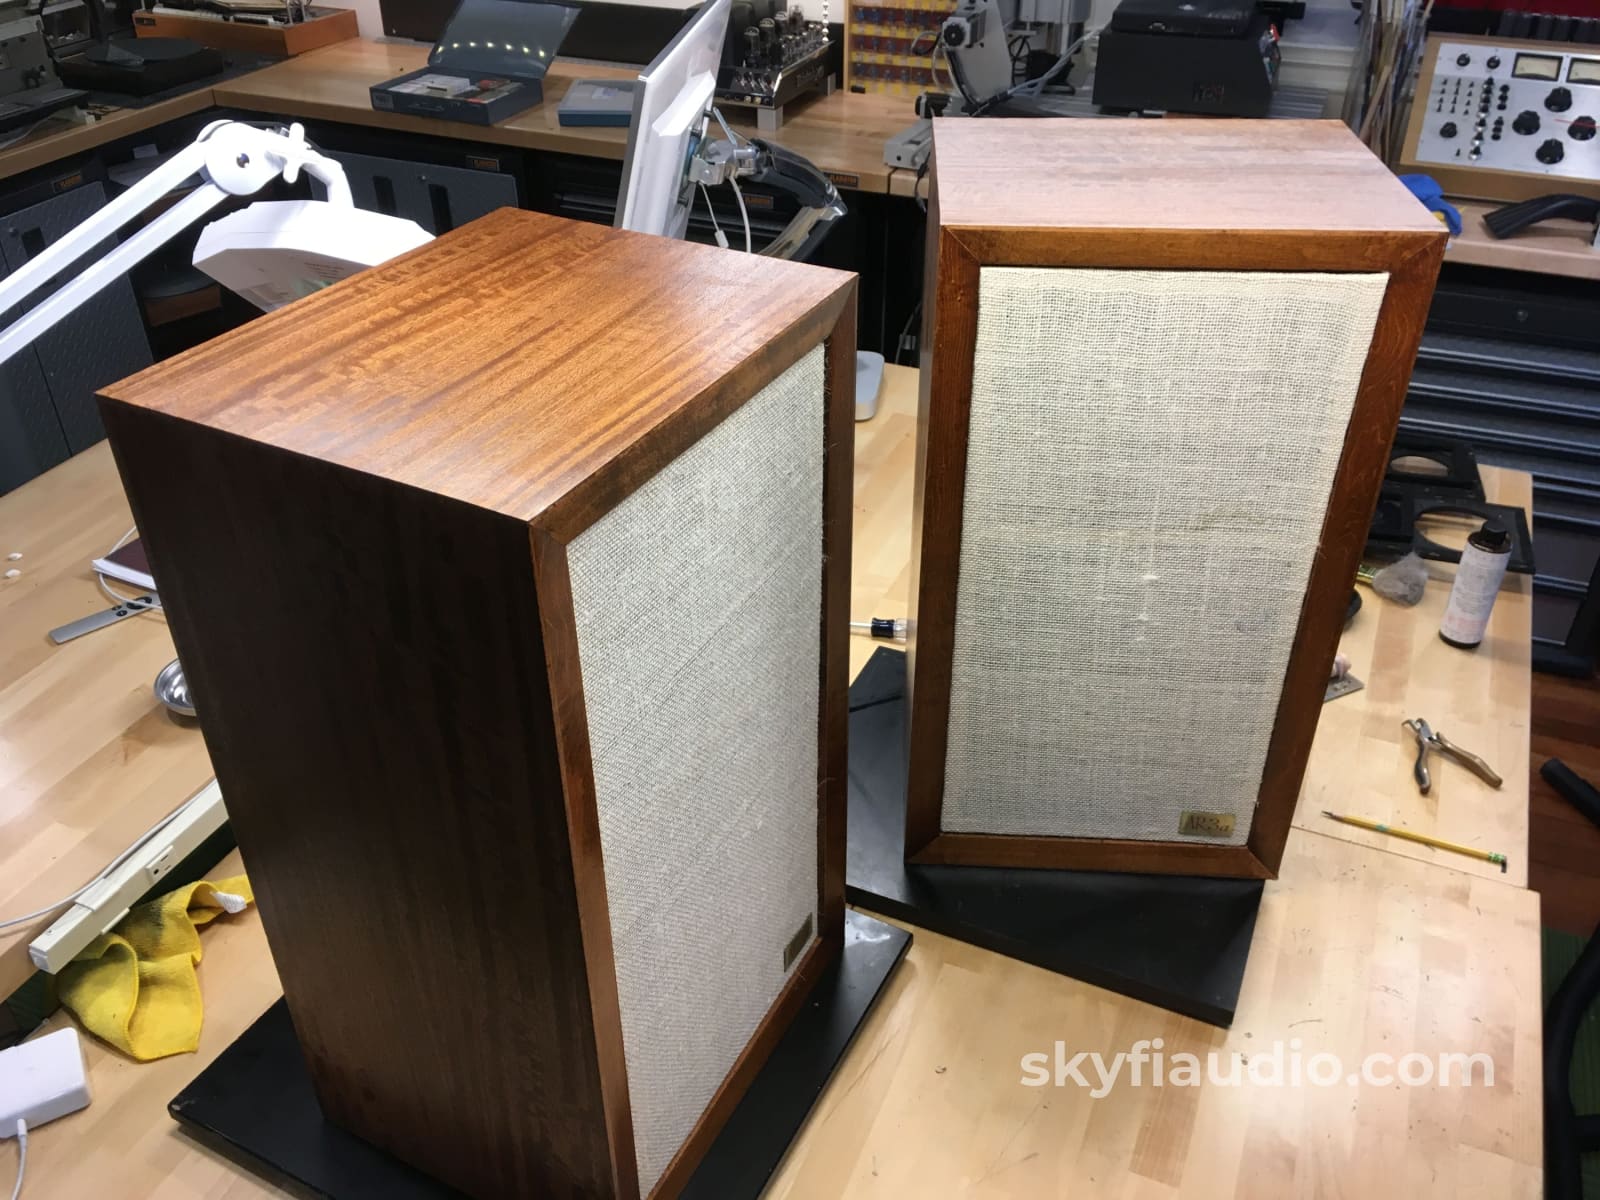 Acoustic Research Ar-3A Speakers